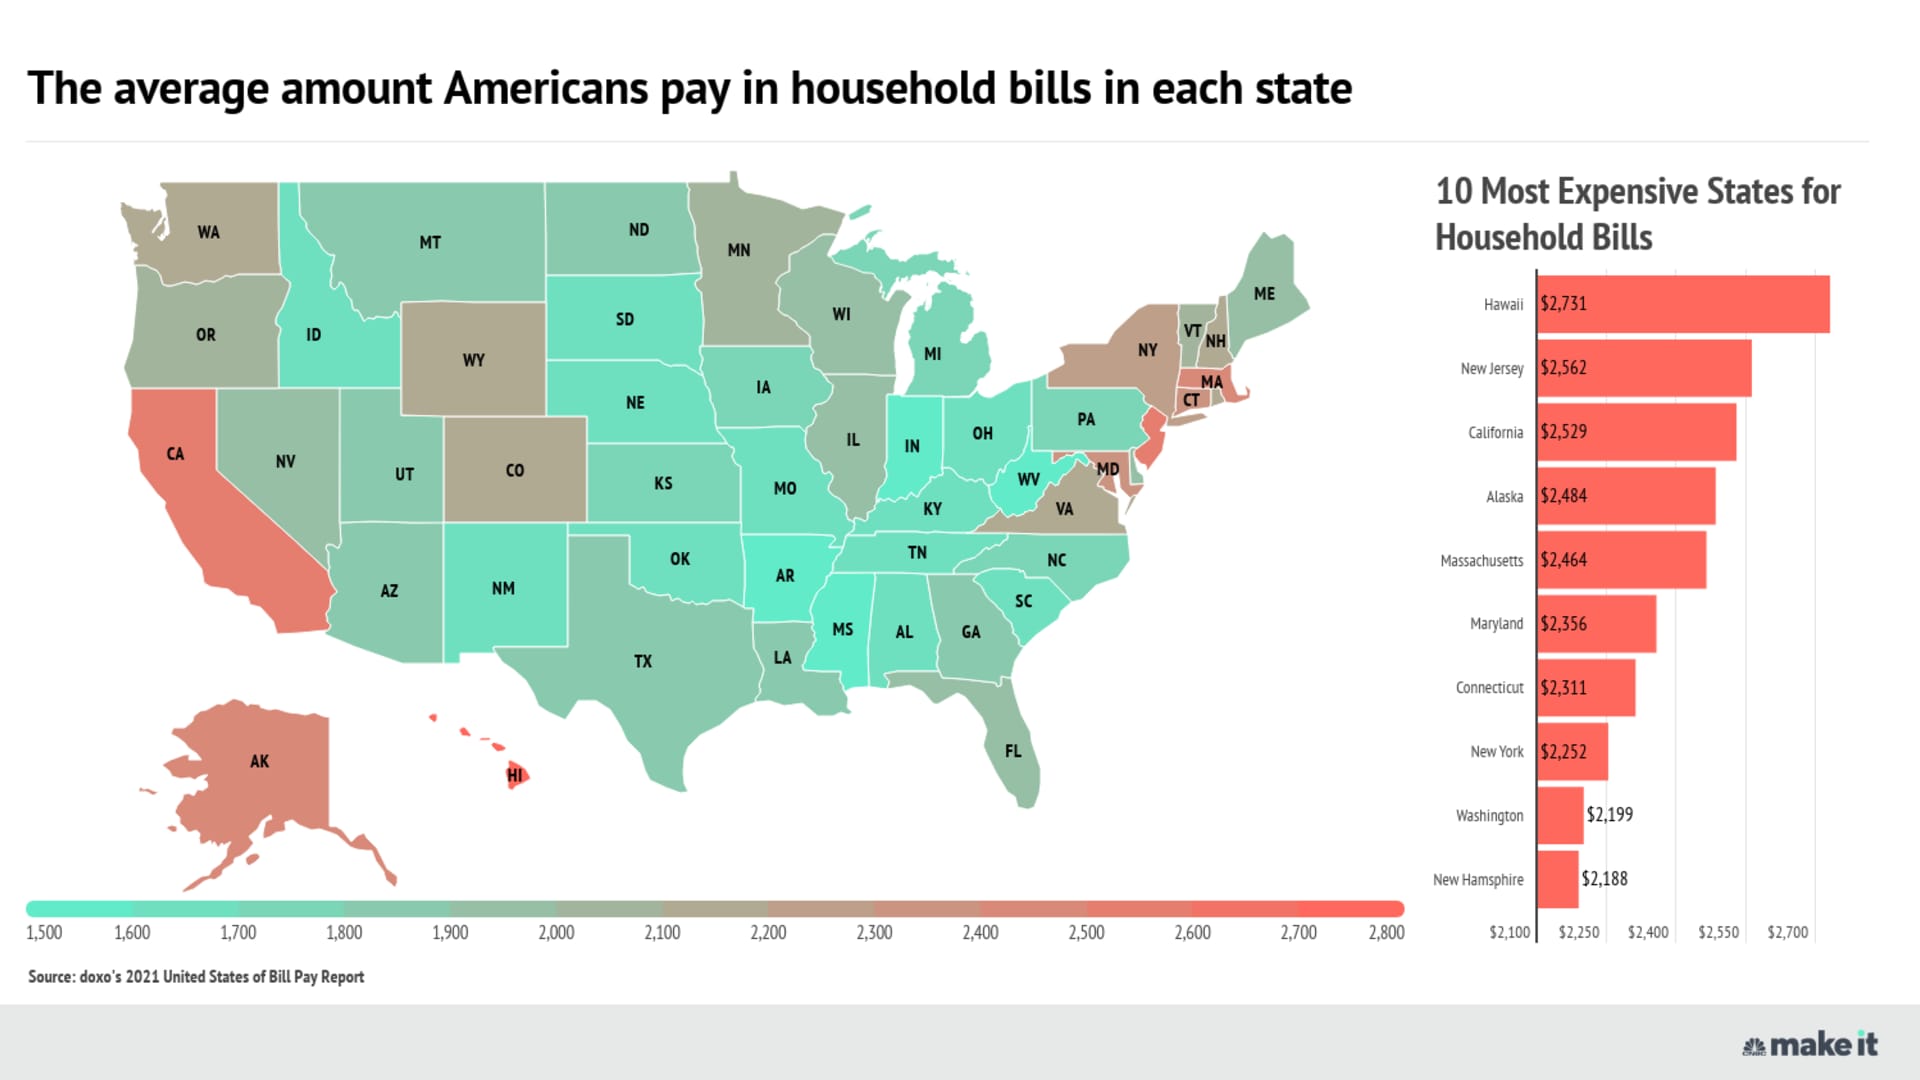 Here's a look at how much households spend each month on their bills in each state. 